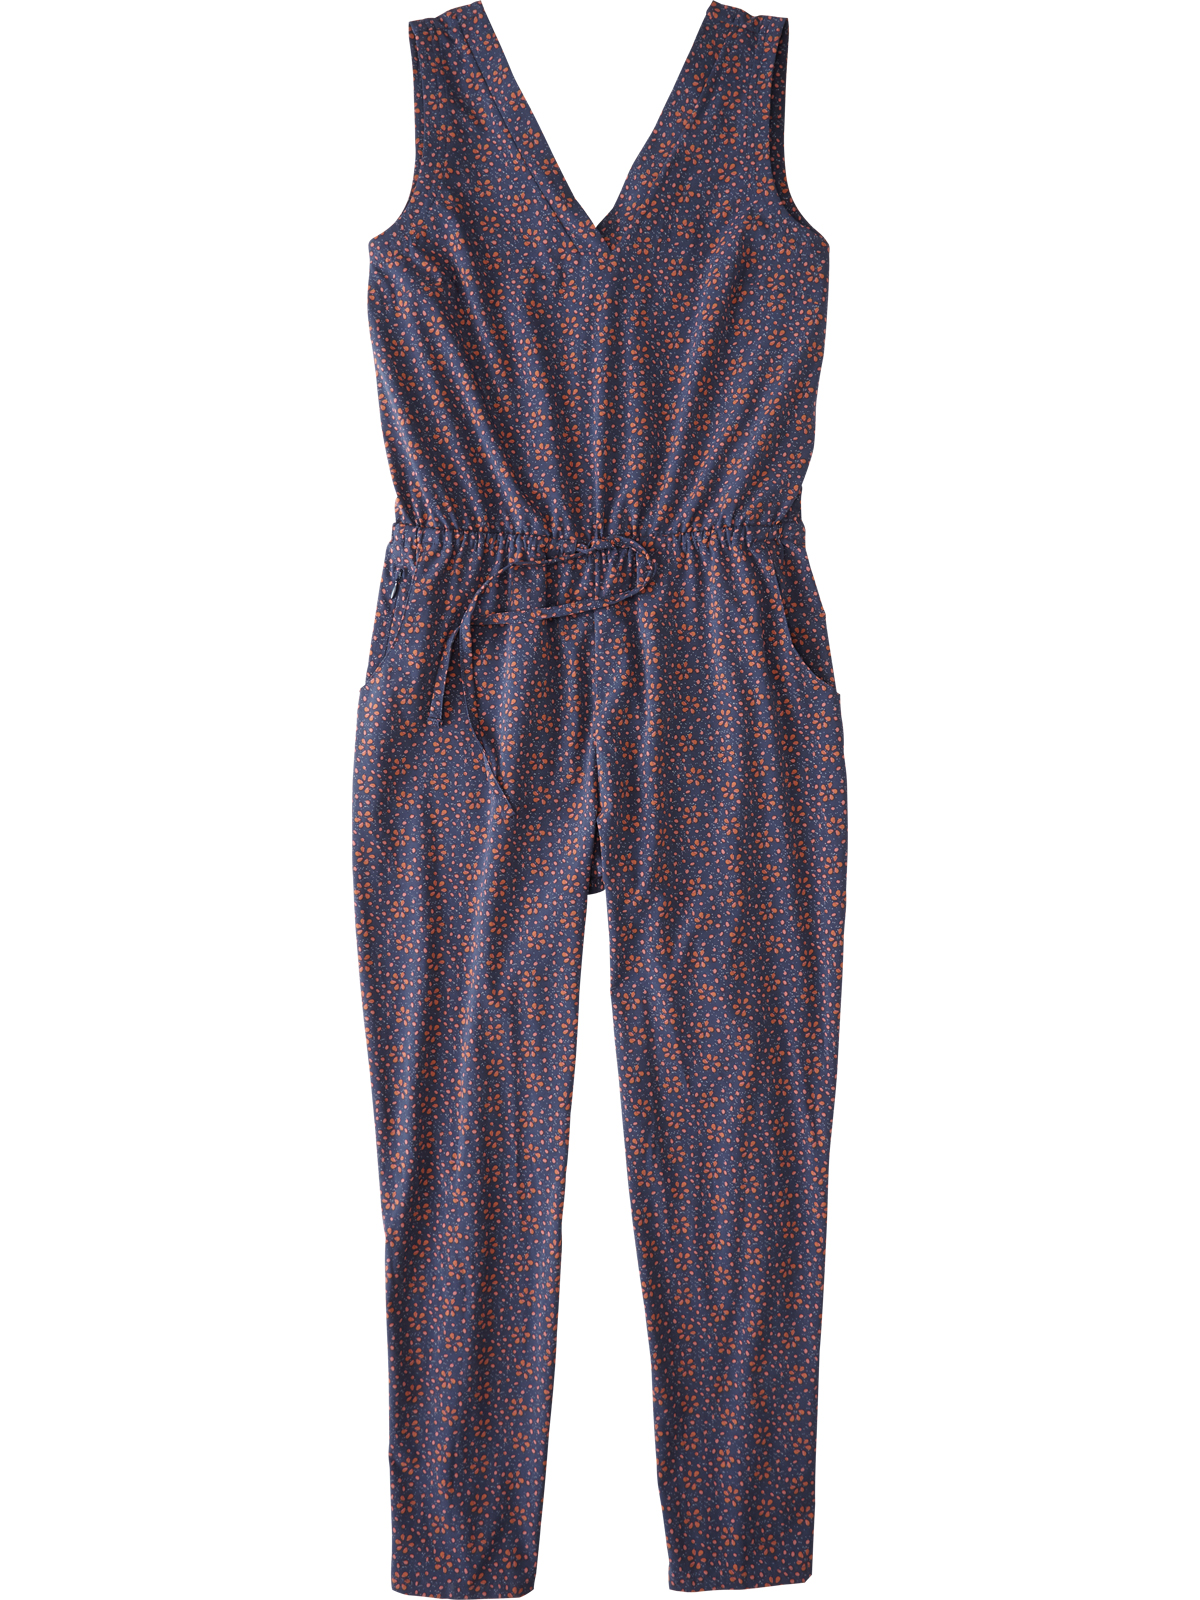 Women's Jumpsuits and Rompers | Title Nine